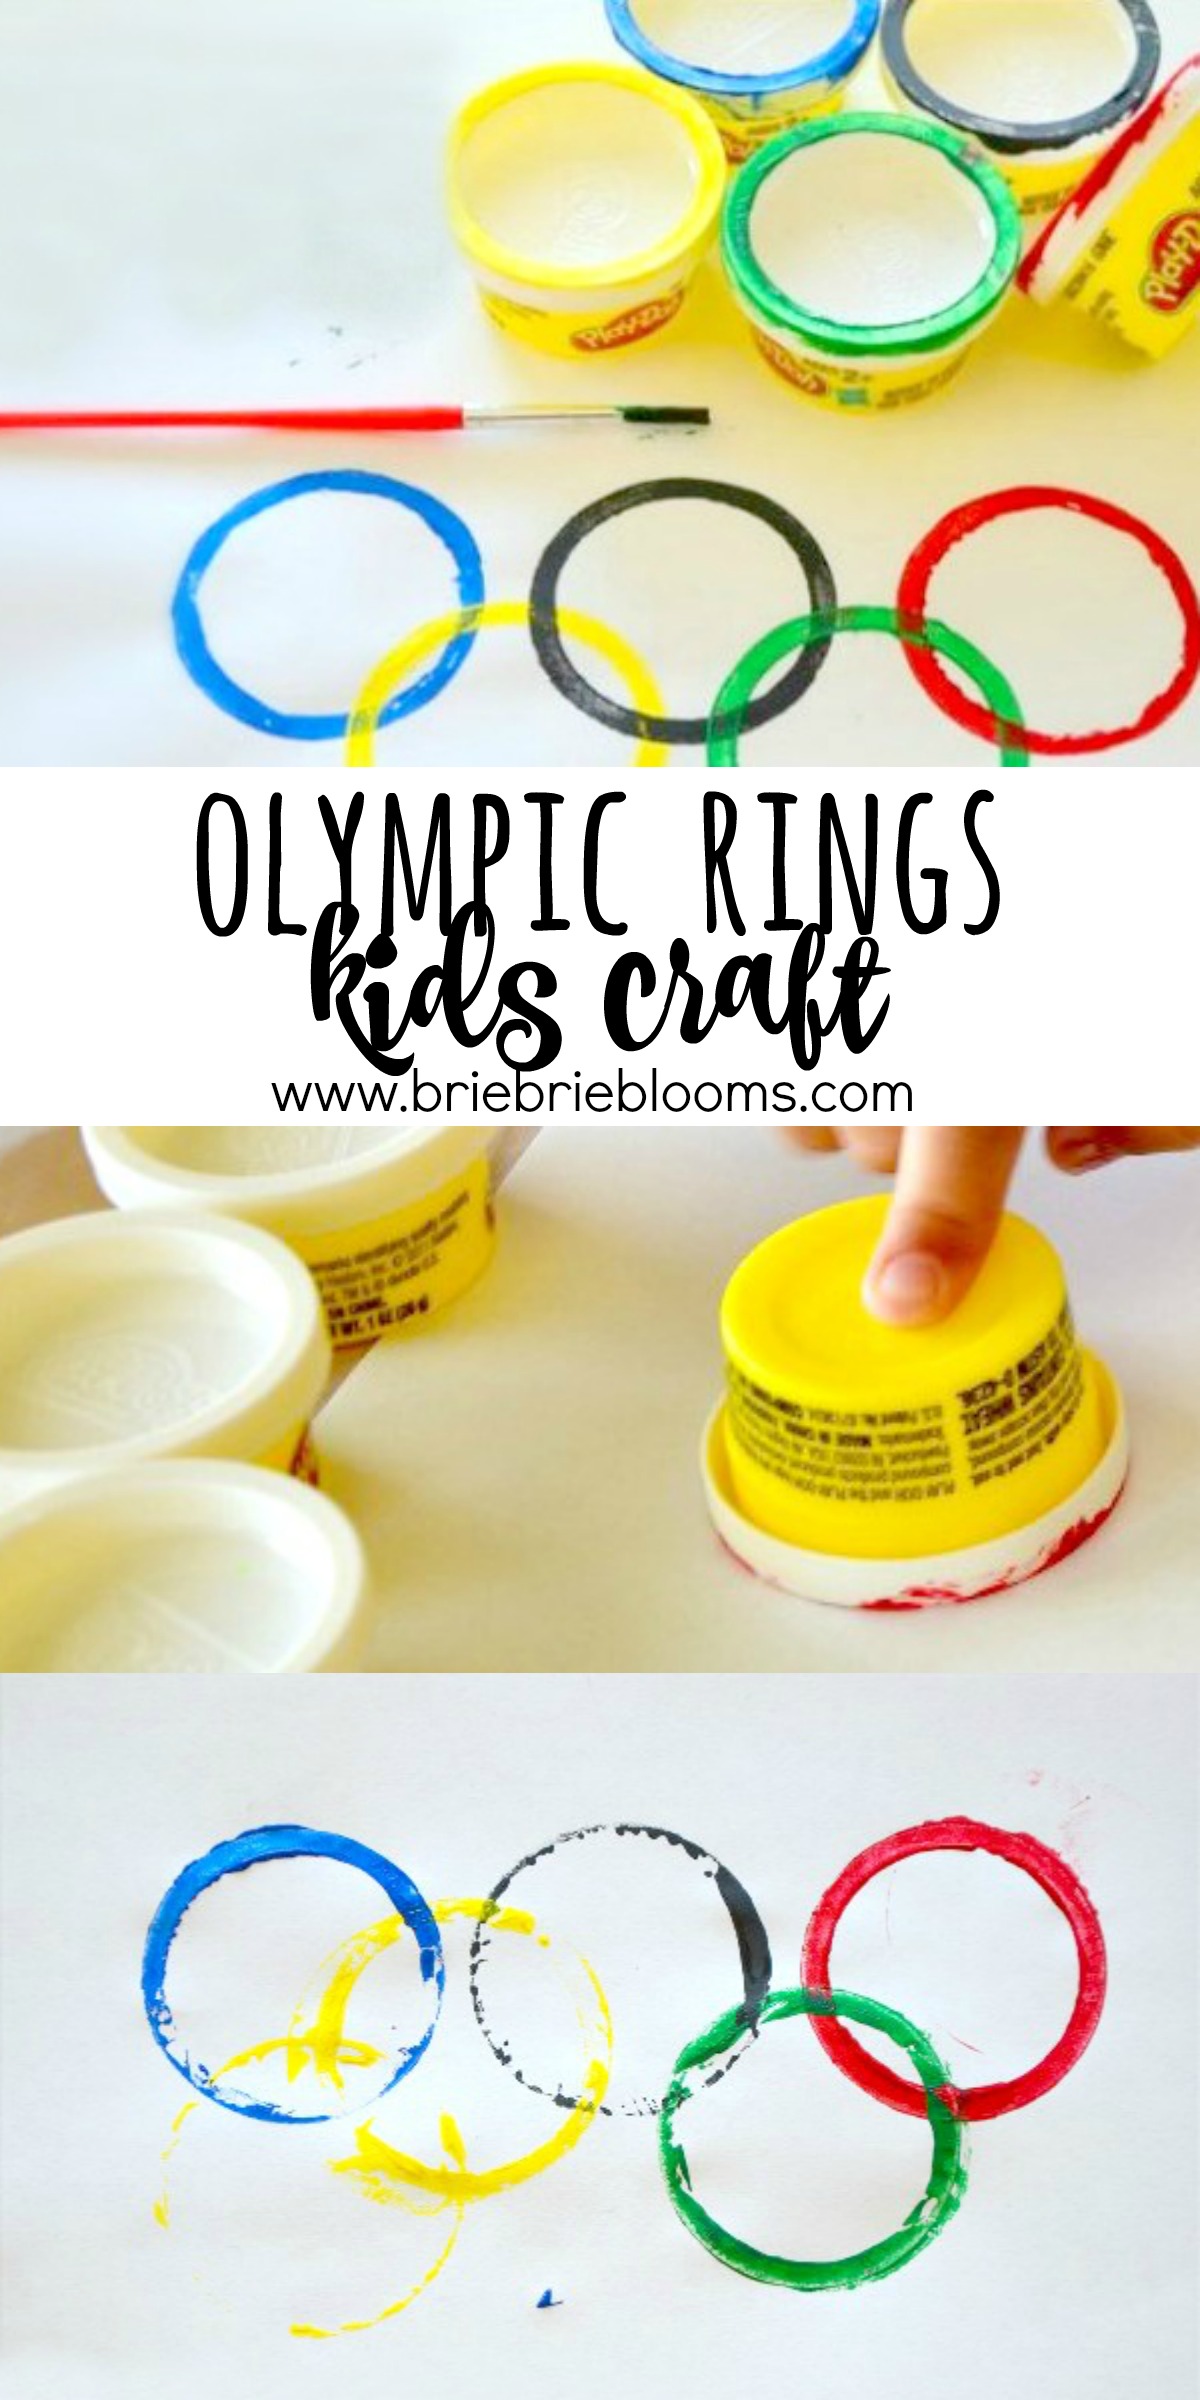 Olympic Rings kids craft